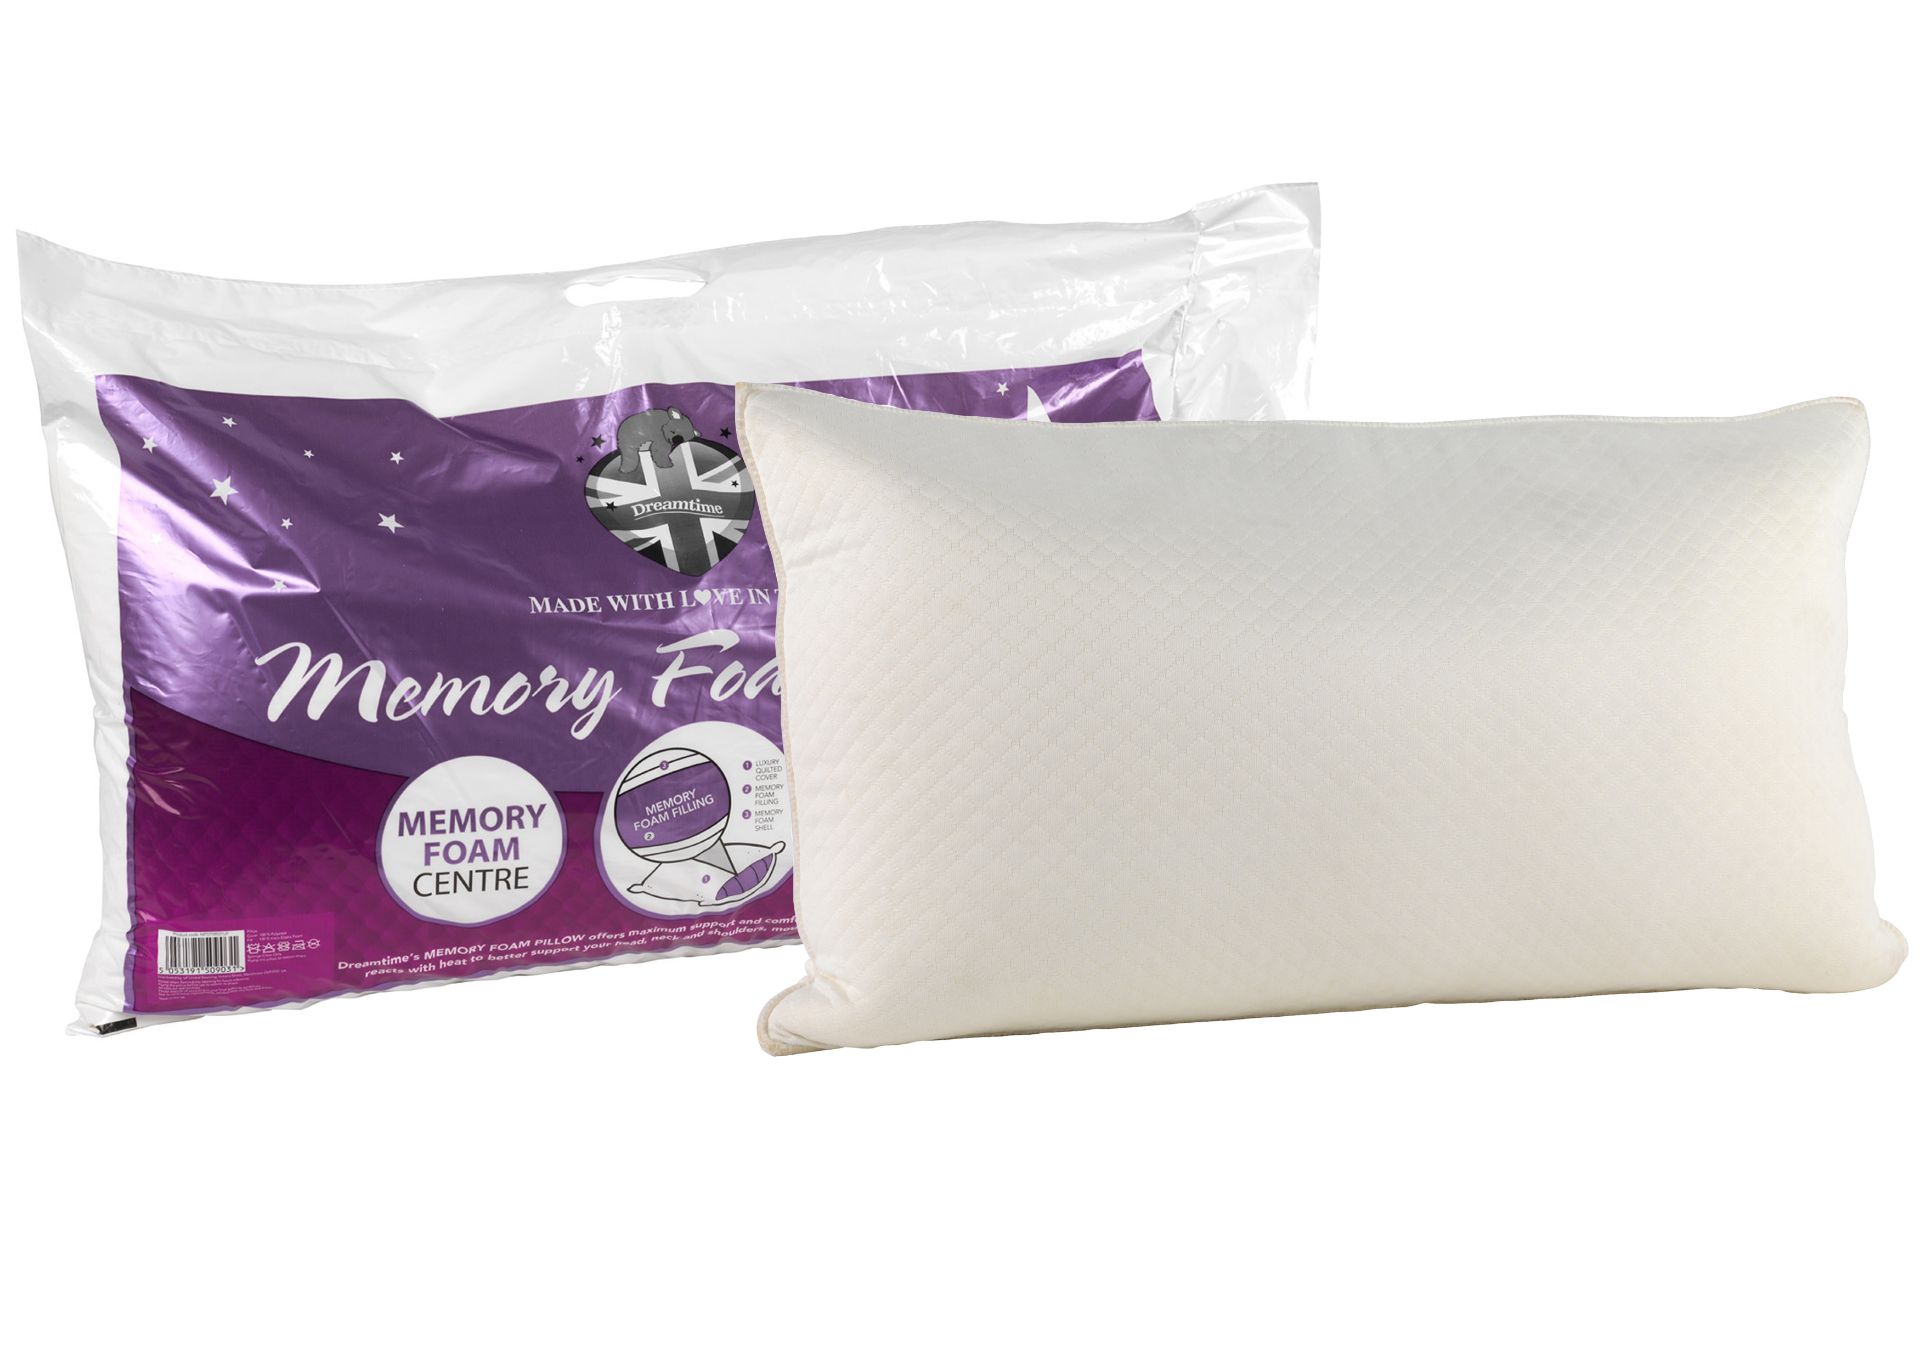 V Brand New Memory Foam Pillow With Luxury Quilted Cover RRP£14.99 X 2 YOUR BID PRICE TO BE